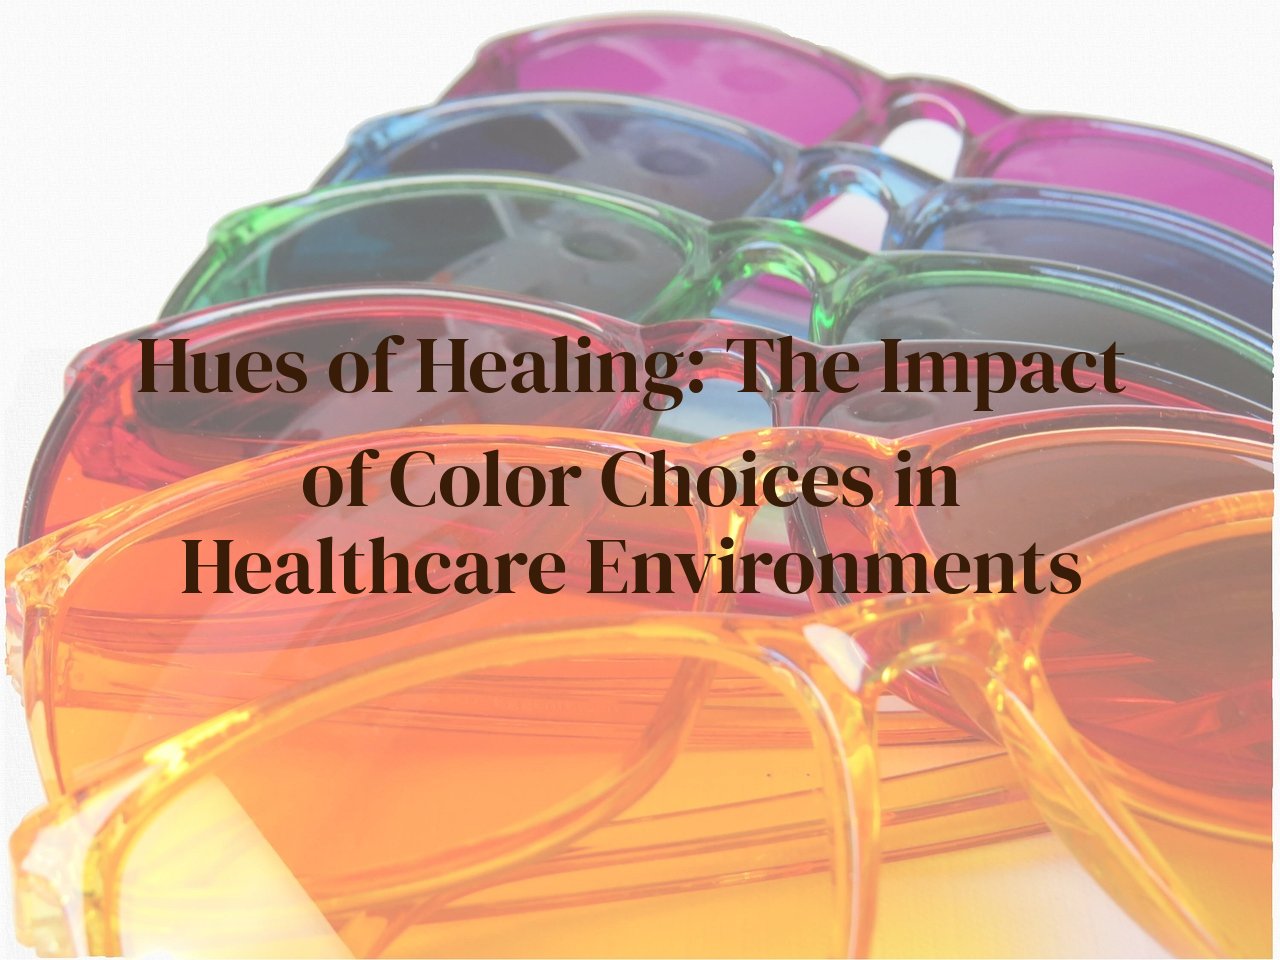 Hues of Healing: The Impact of Color Choices in Healthcare Environments